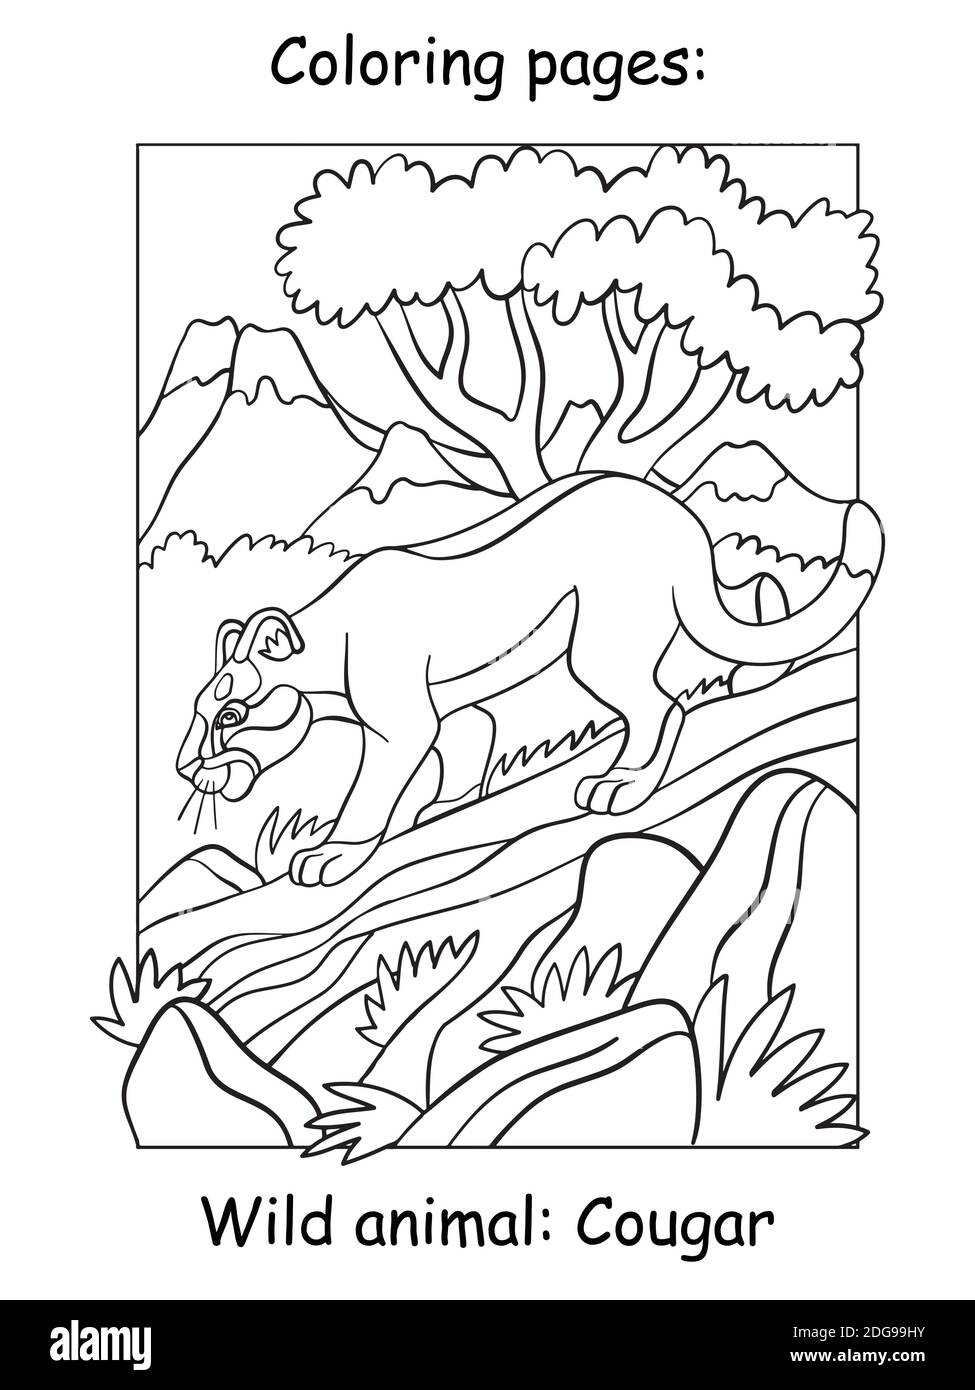 Vector coloring pages cougar walking on a tree in mountain area. Cartoon illustration isolated on white background. For coloring book, preschool educa Stock Vector